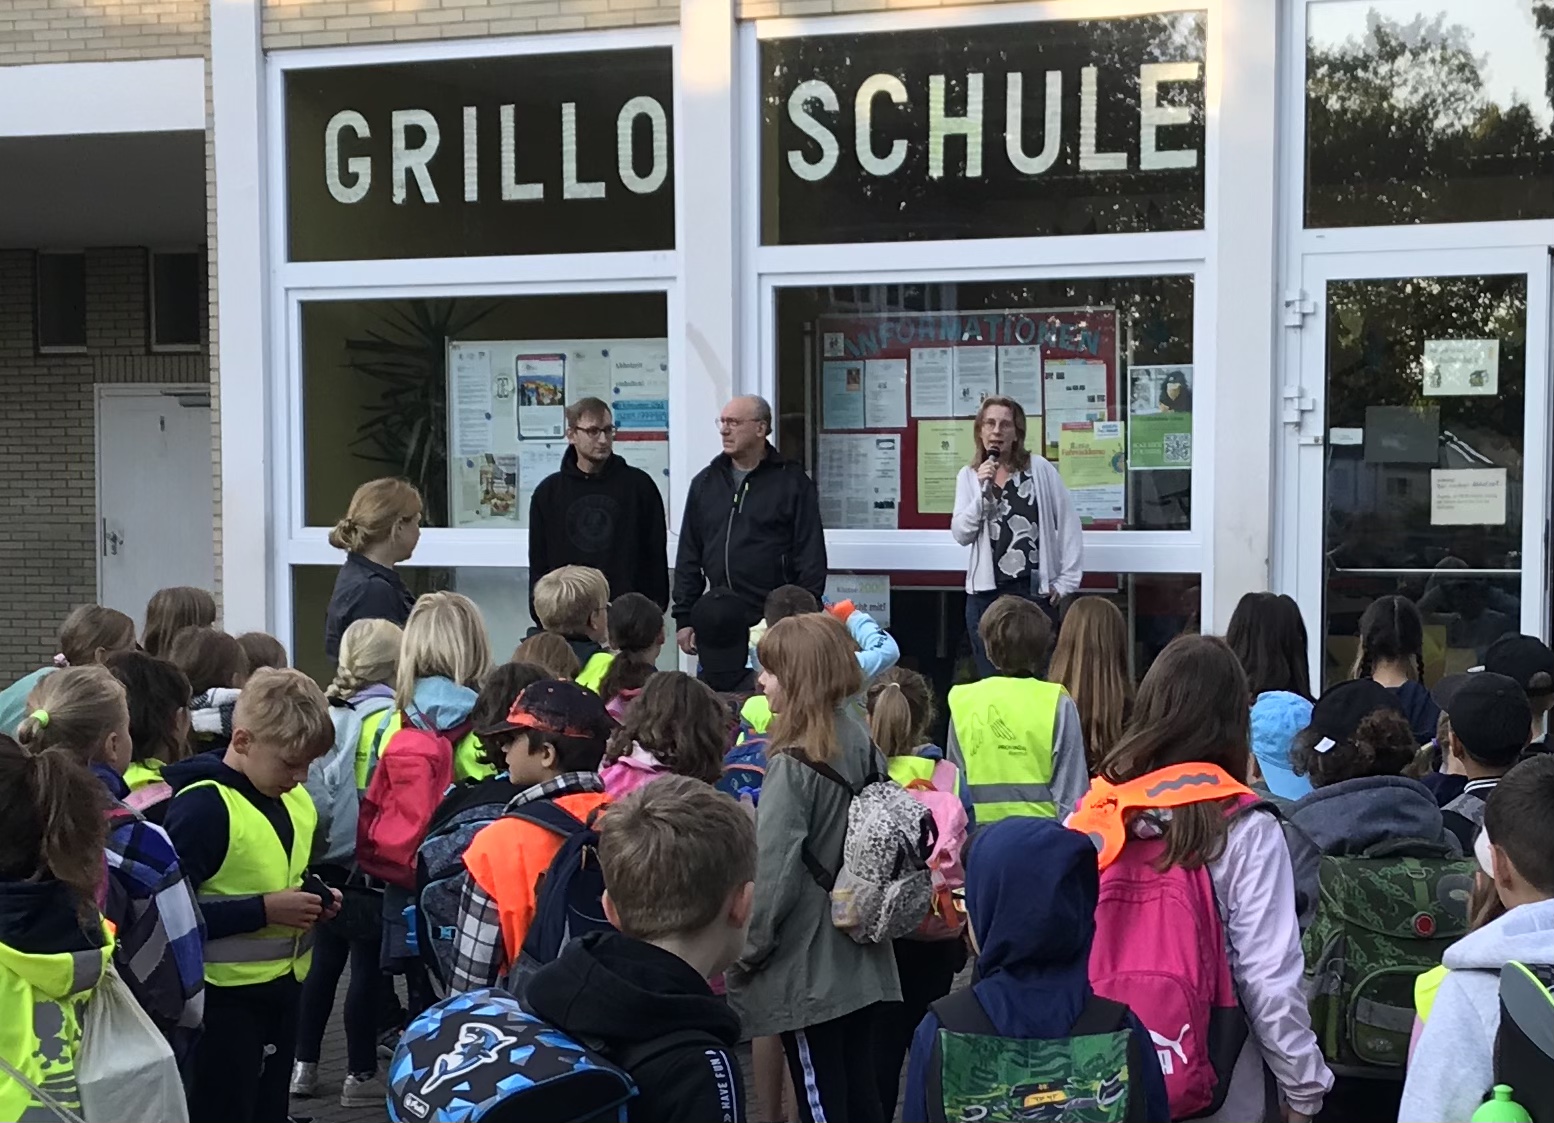 Grilloschule Cleanup Day (NRW)